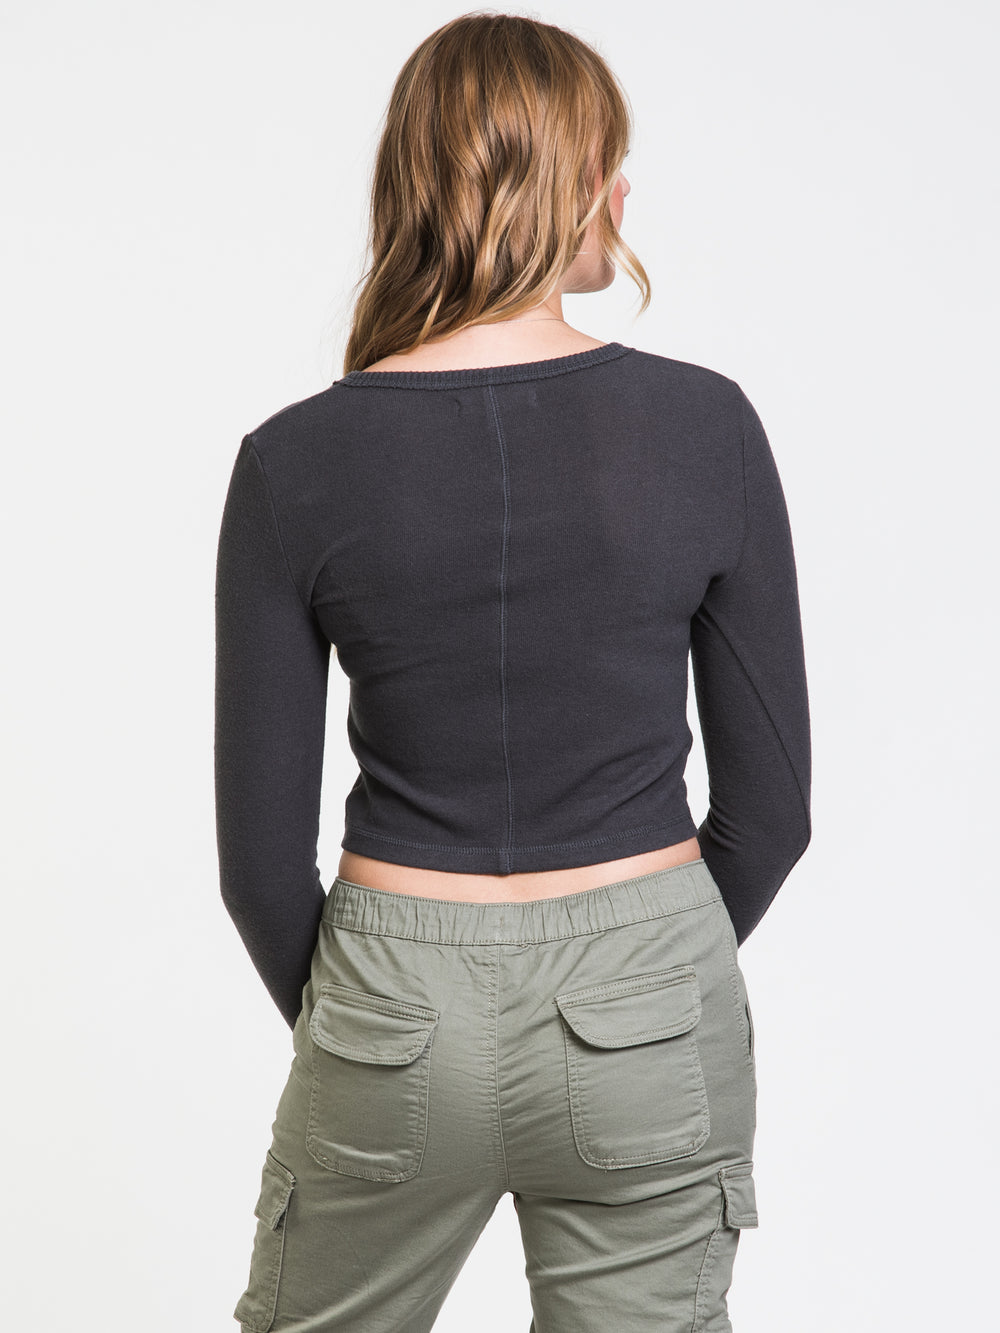 HARLOW PLUSH CROPPED HENLEY - CLEARANCE